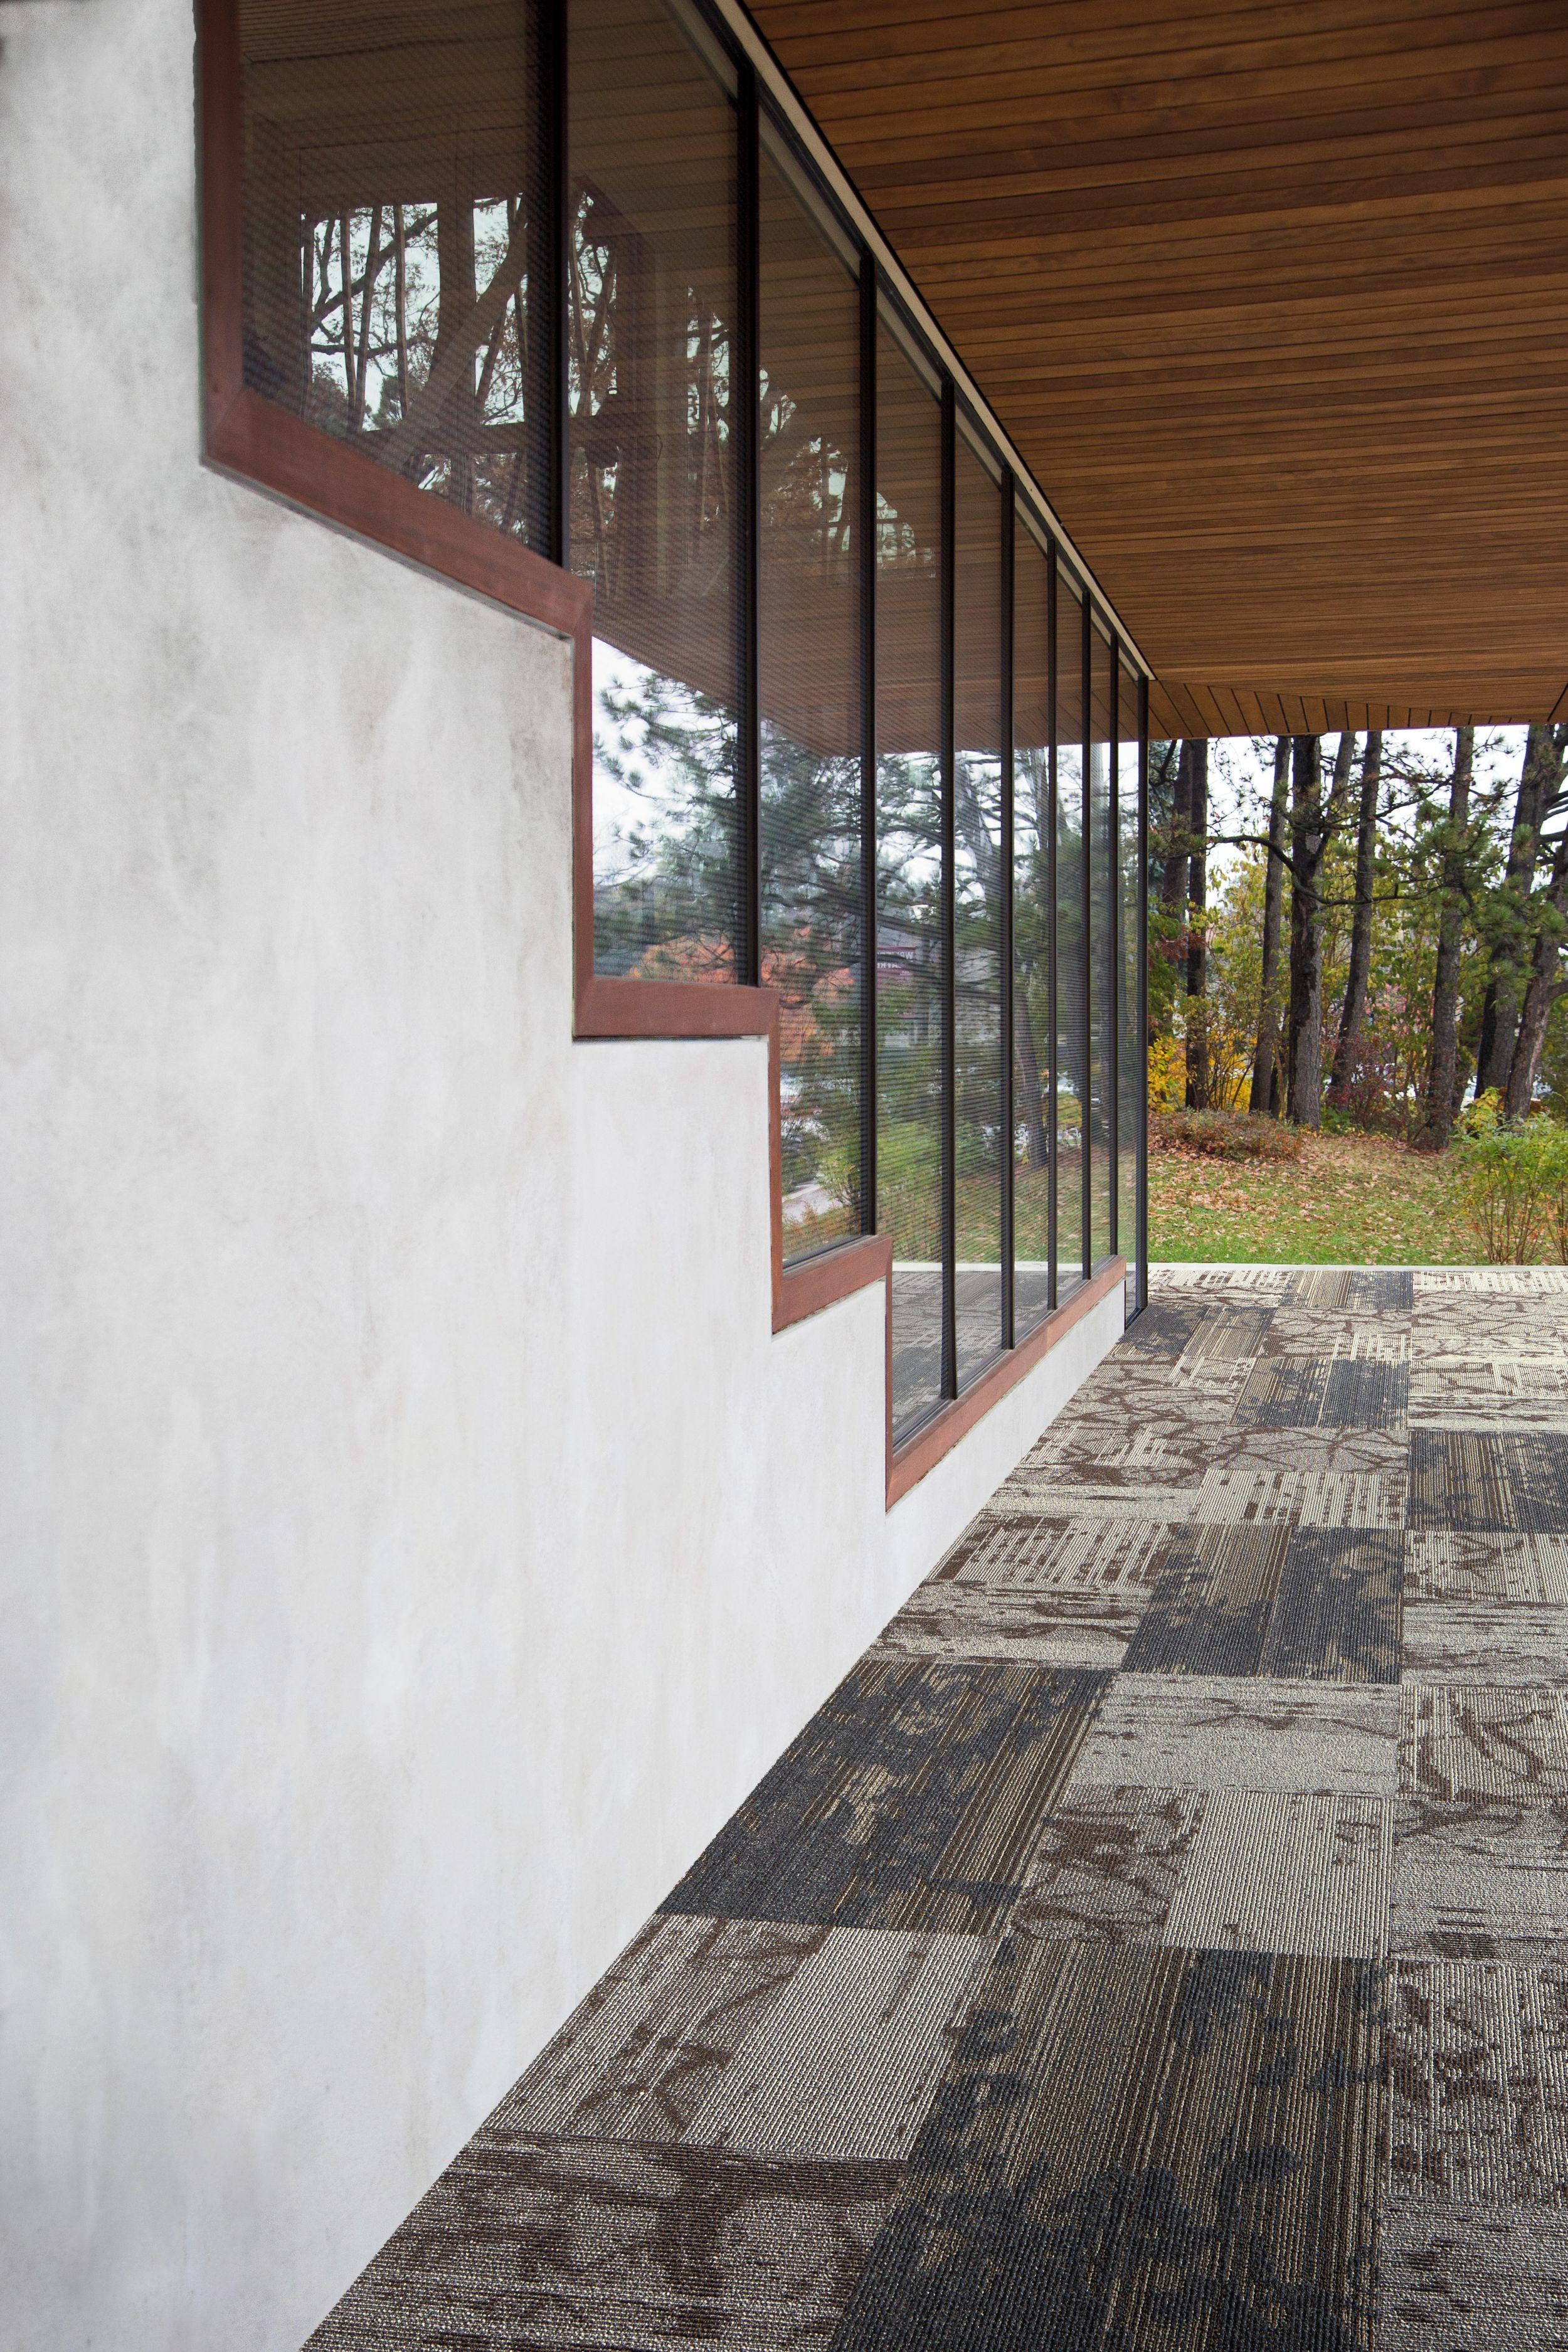 Interface Glazing and Ground plank carpet tile shown for inspiration in outdoor setting imagen número 14